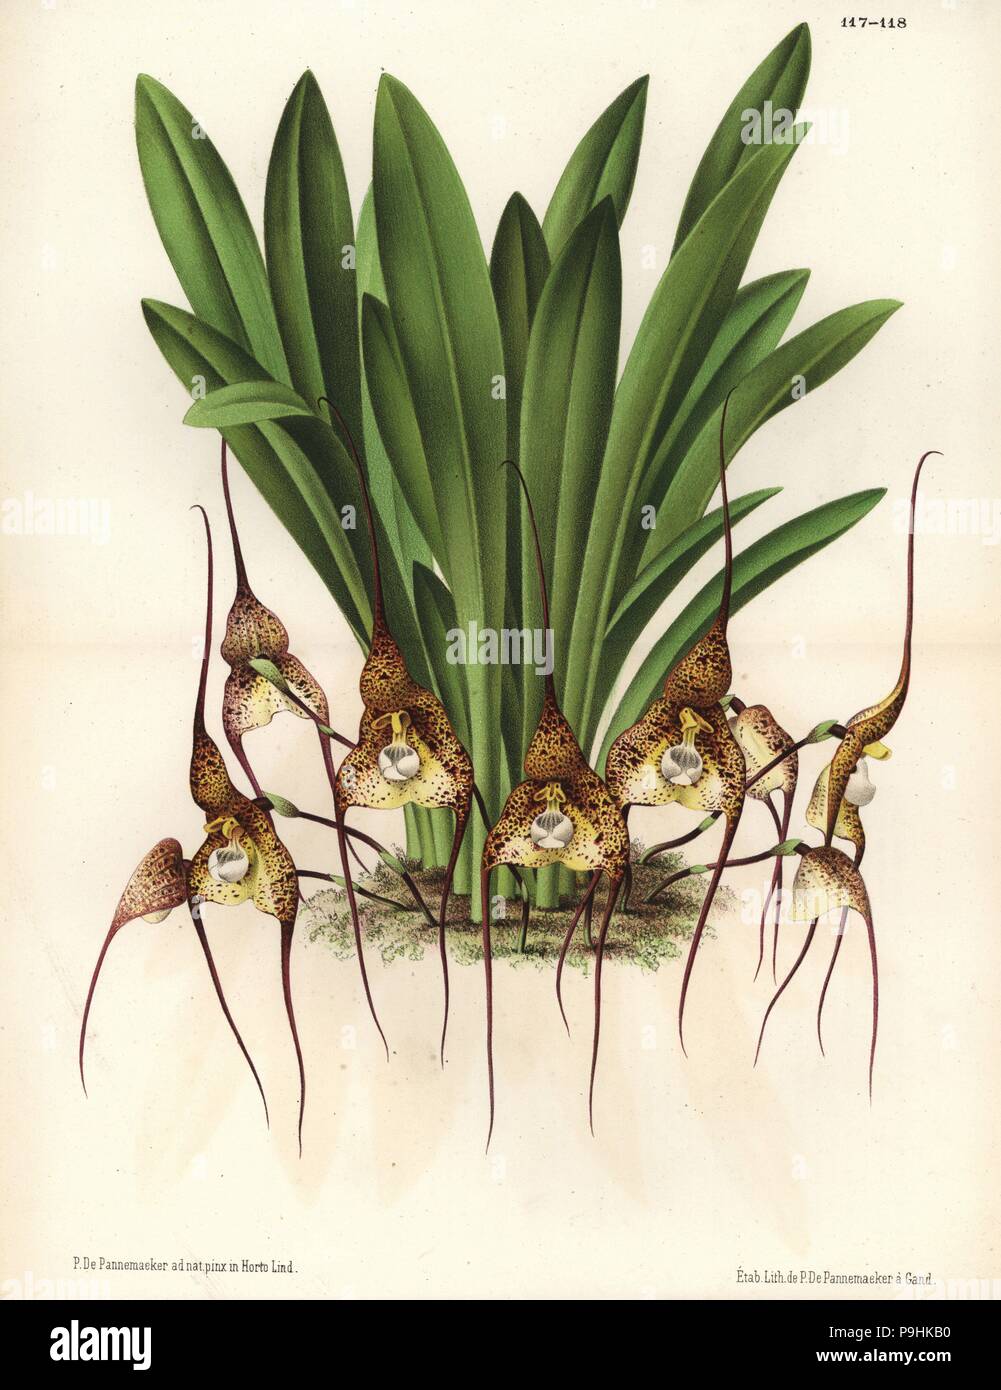 Dracula chimaera orchid (Masdevallia chimaera). Drawn and chromolithographed by P. de Pannemaeker from Jean Linden's l'Illustration Horticole, Brussels, 1873. Stock Photo